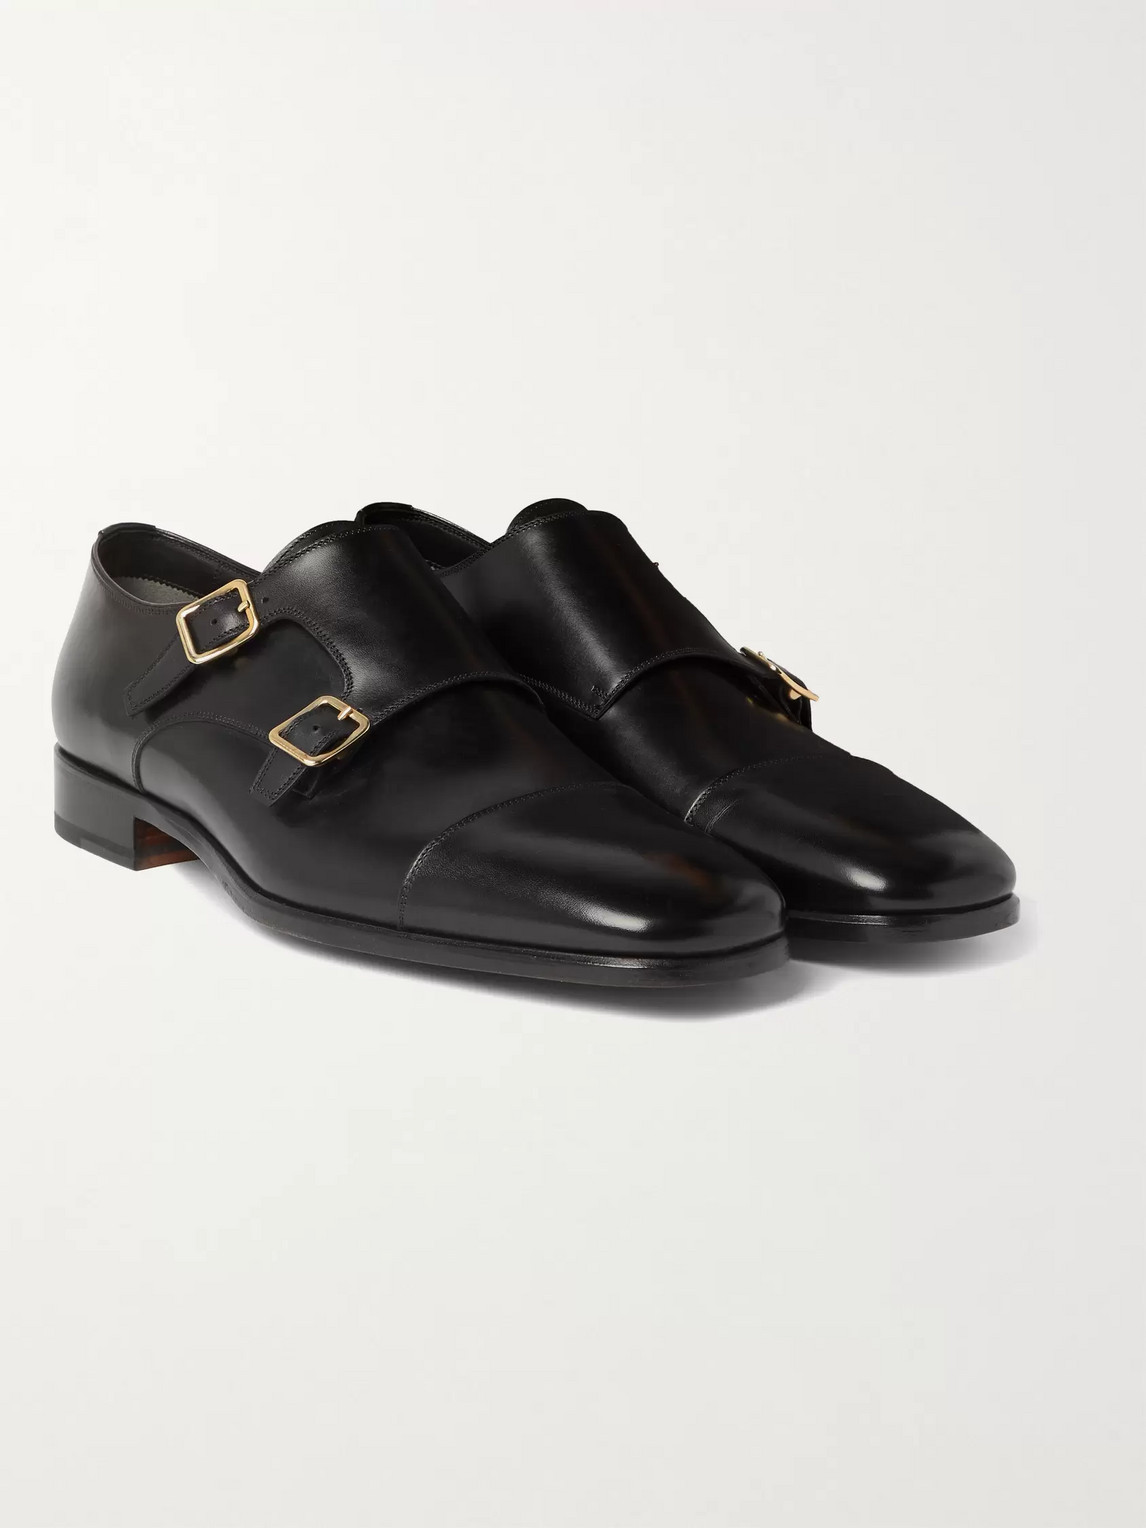 TOM FORD BURNISHED-LEATHER MONK-STRAP SHOES